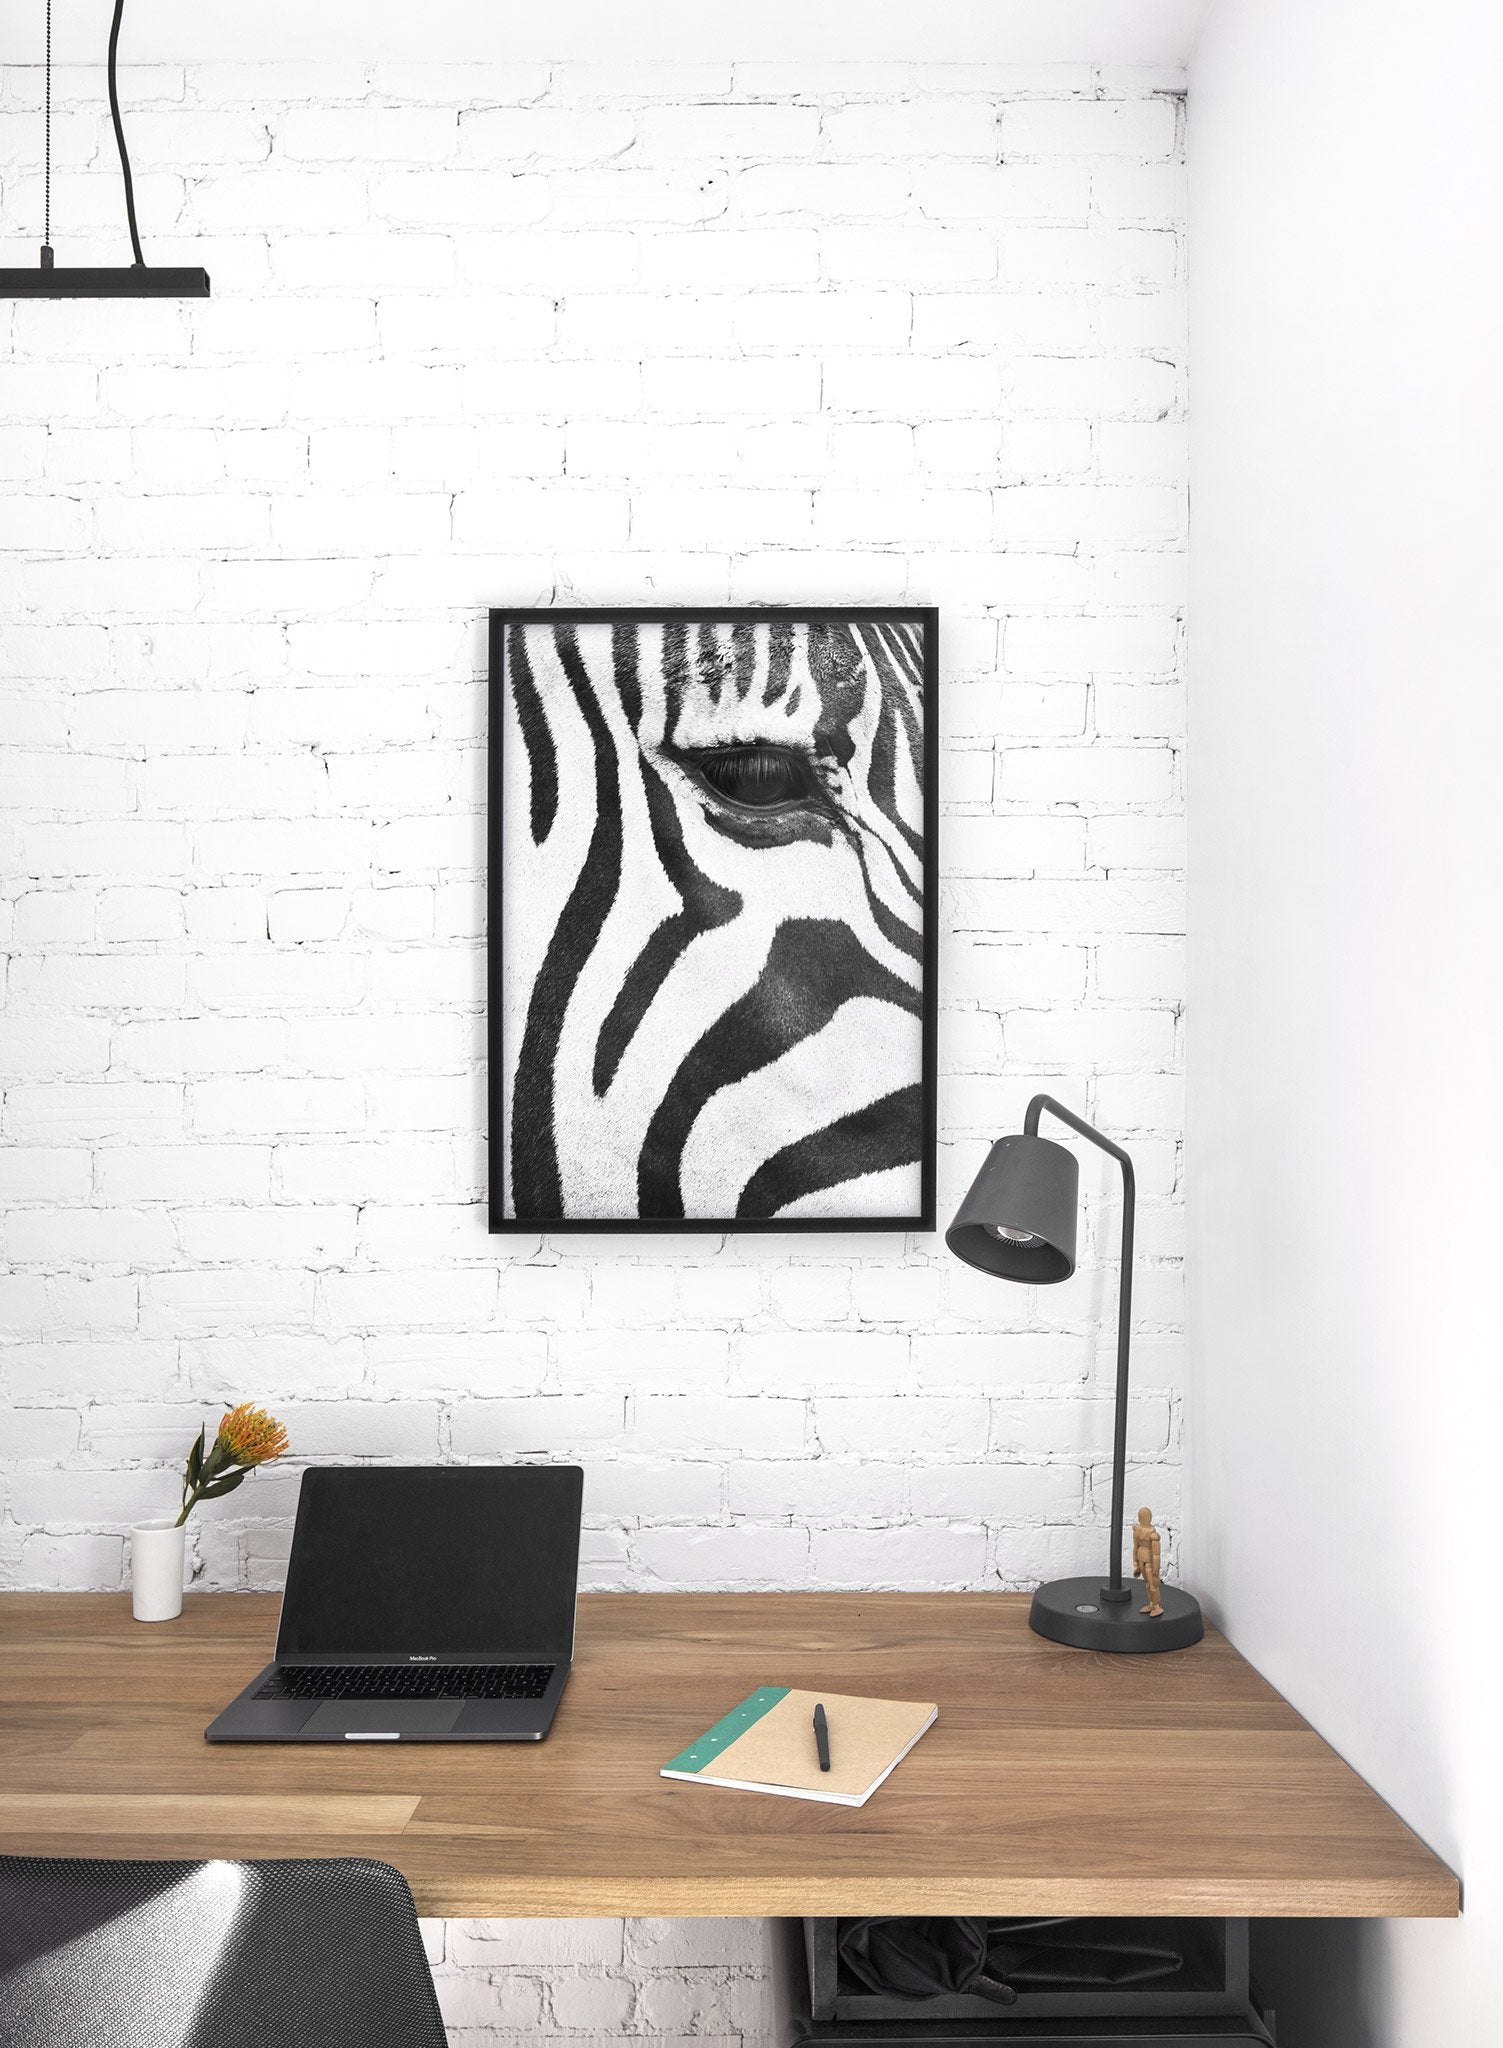 Kids nursery photography poster by Opposite Wall with Zebra - Lifestyle - Office Desk